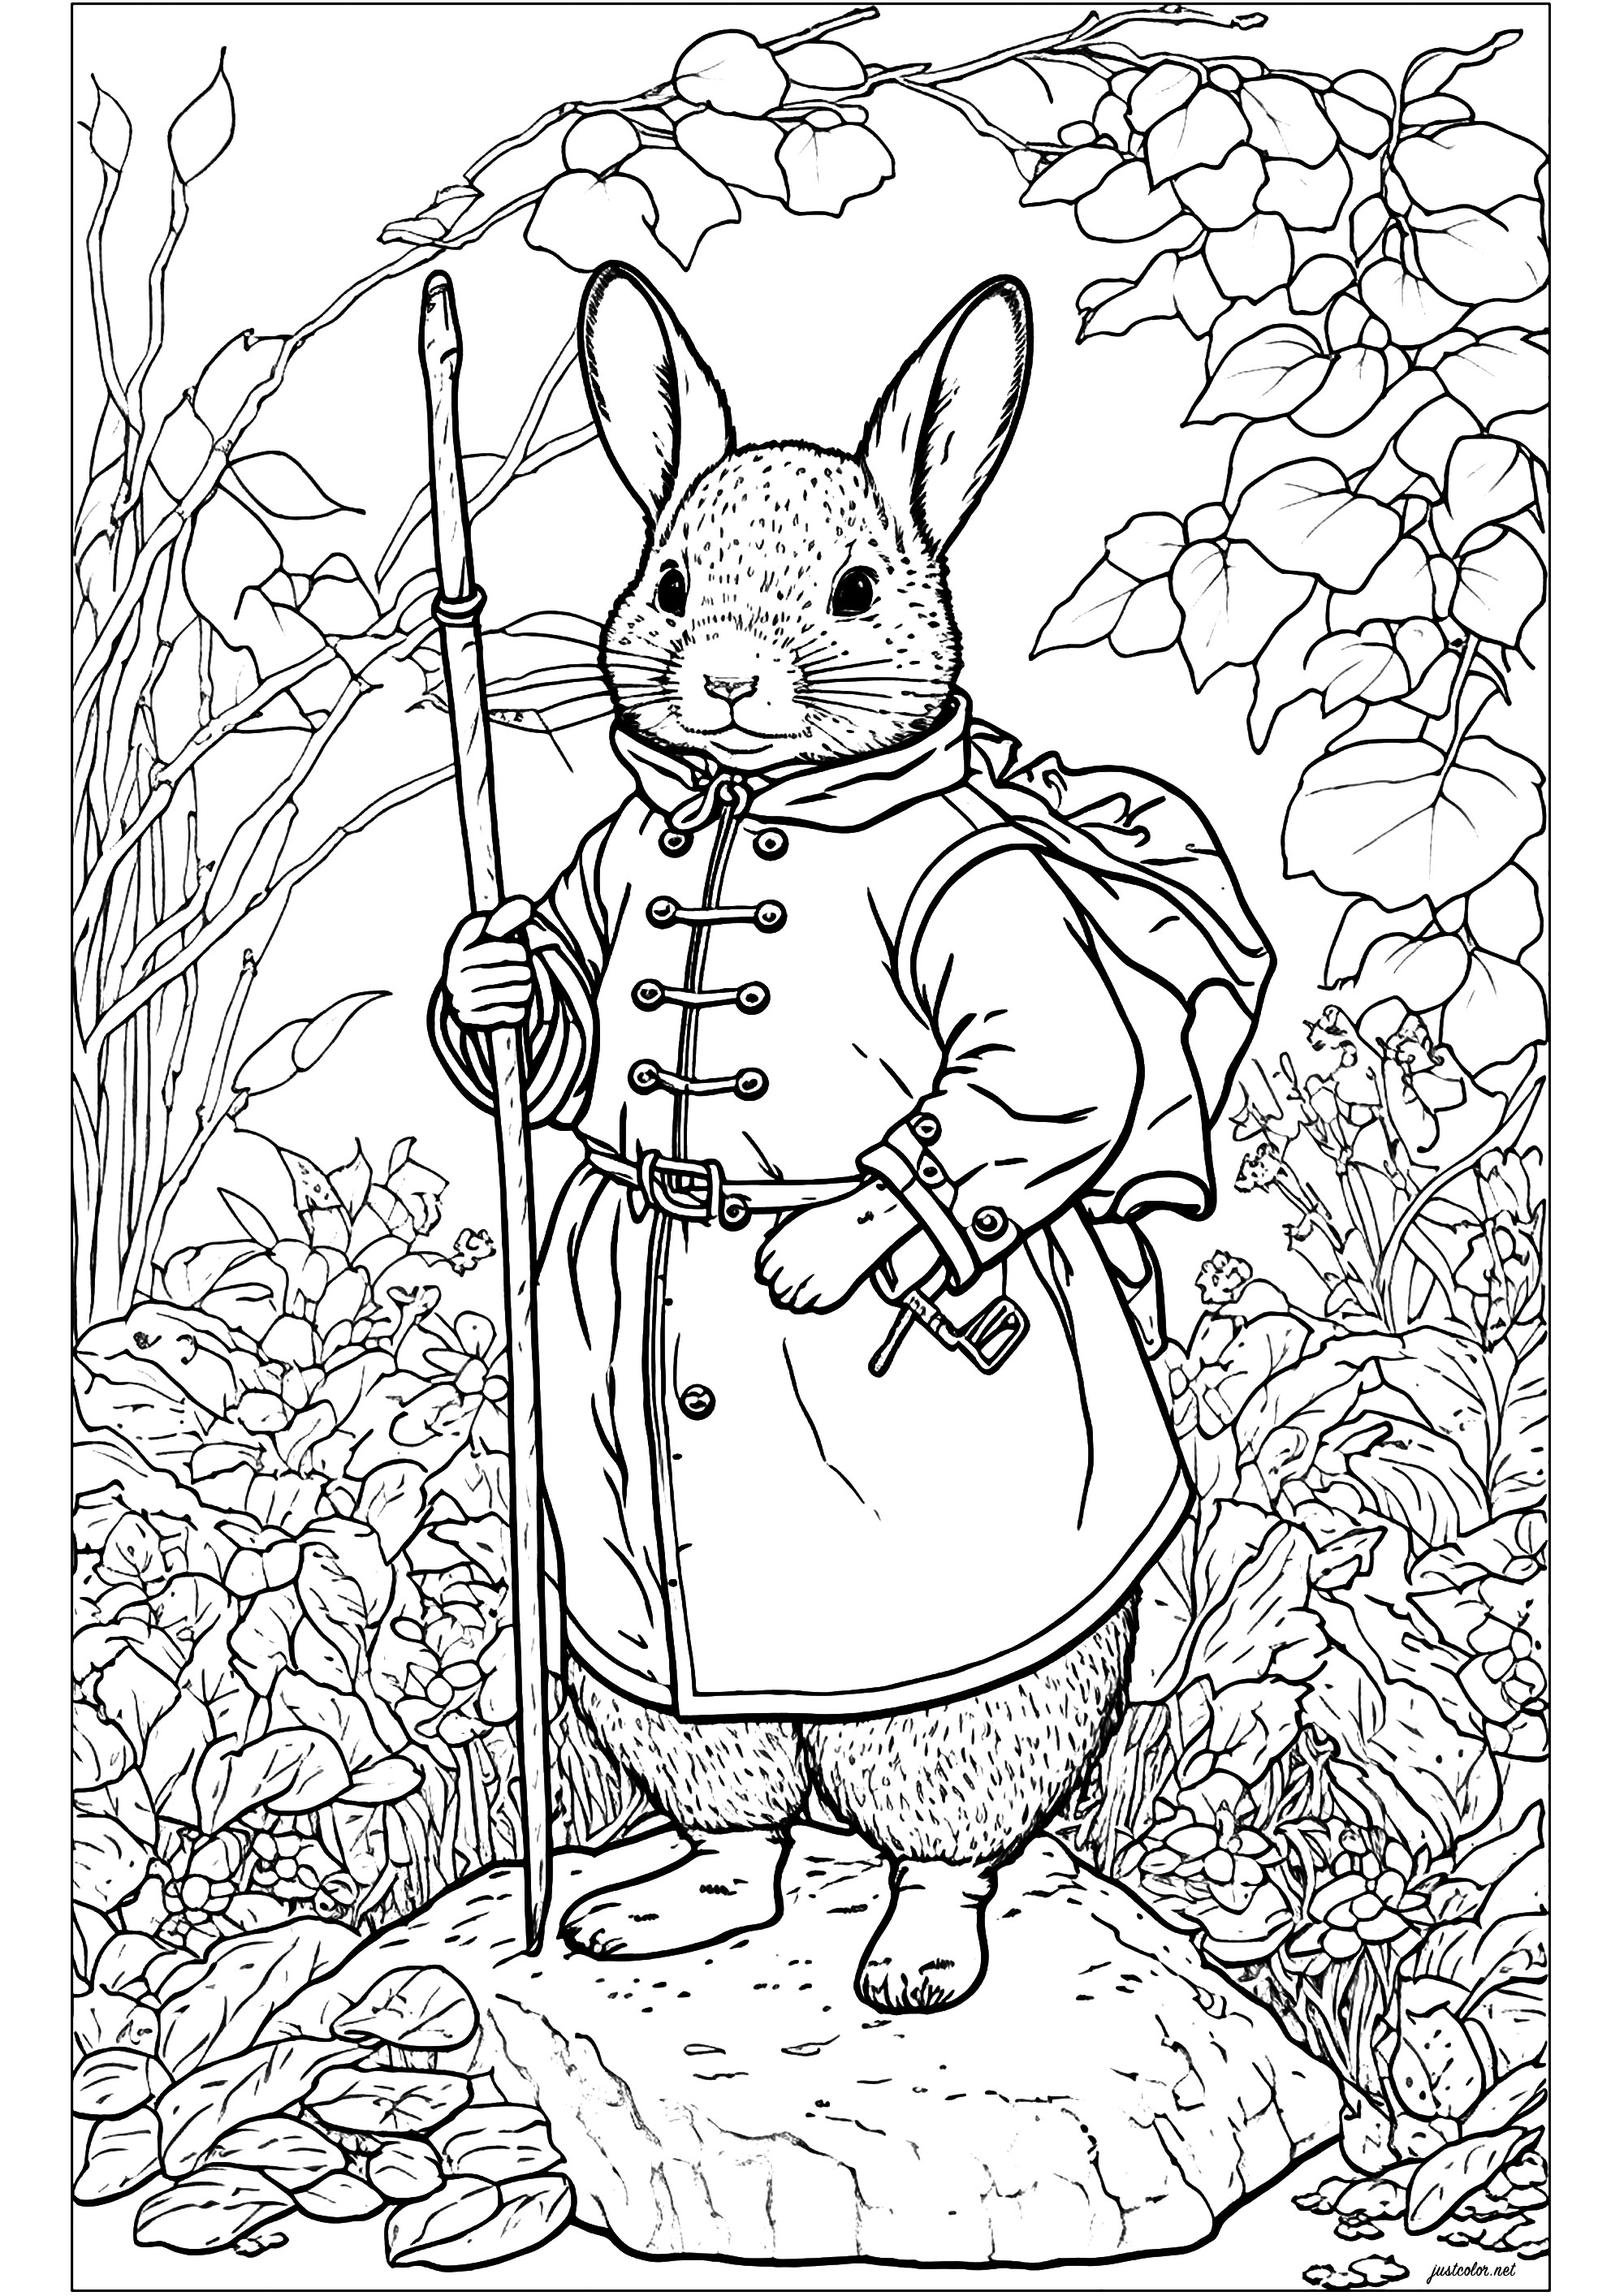 Coloring of a rabbit ready for great adventures. Color this bunny dressed as an adventurer. Standing like a human, he looks straight ahead, determined and ready to go on an adventure with his stick. Also color in the lush vegetation around him.